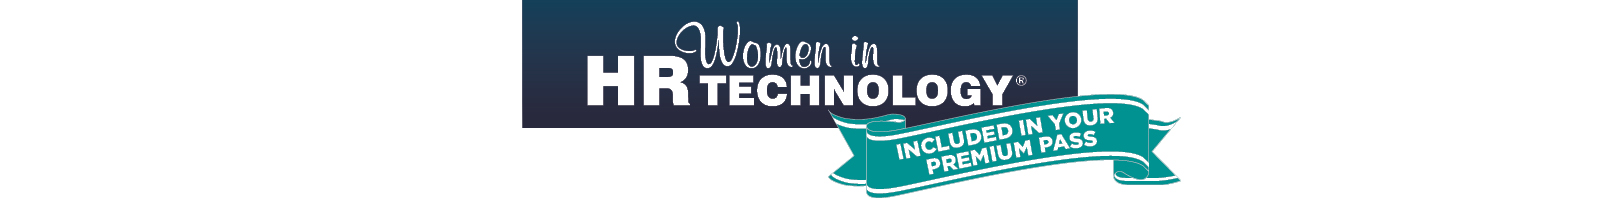 Women in HR Technology - Access to the Summit is included in your Premium Pass!